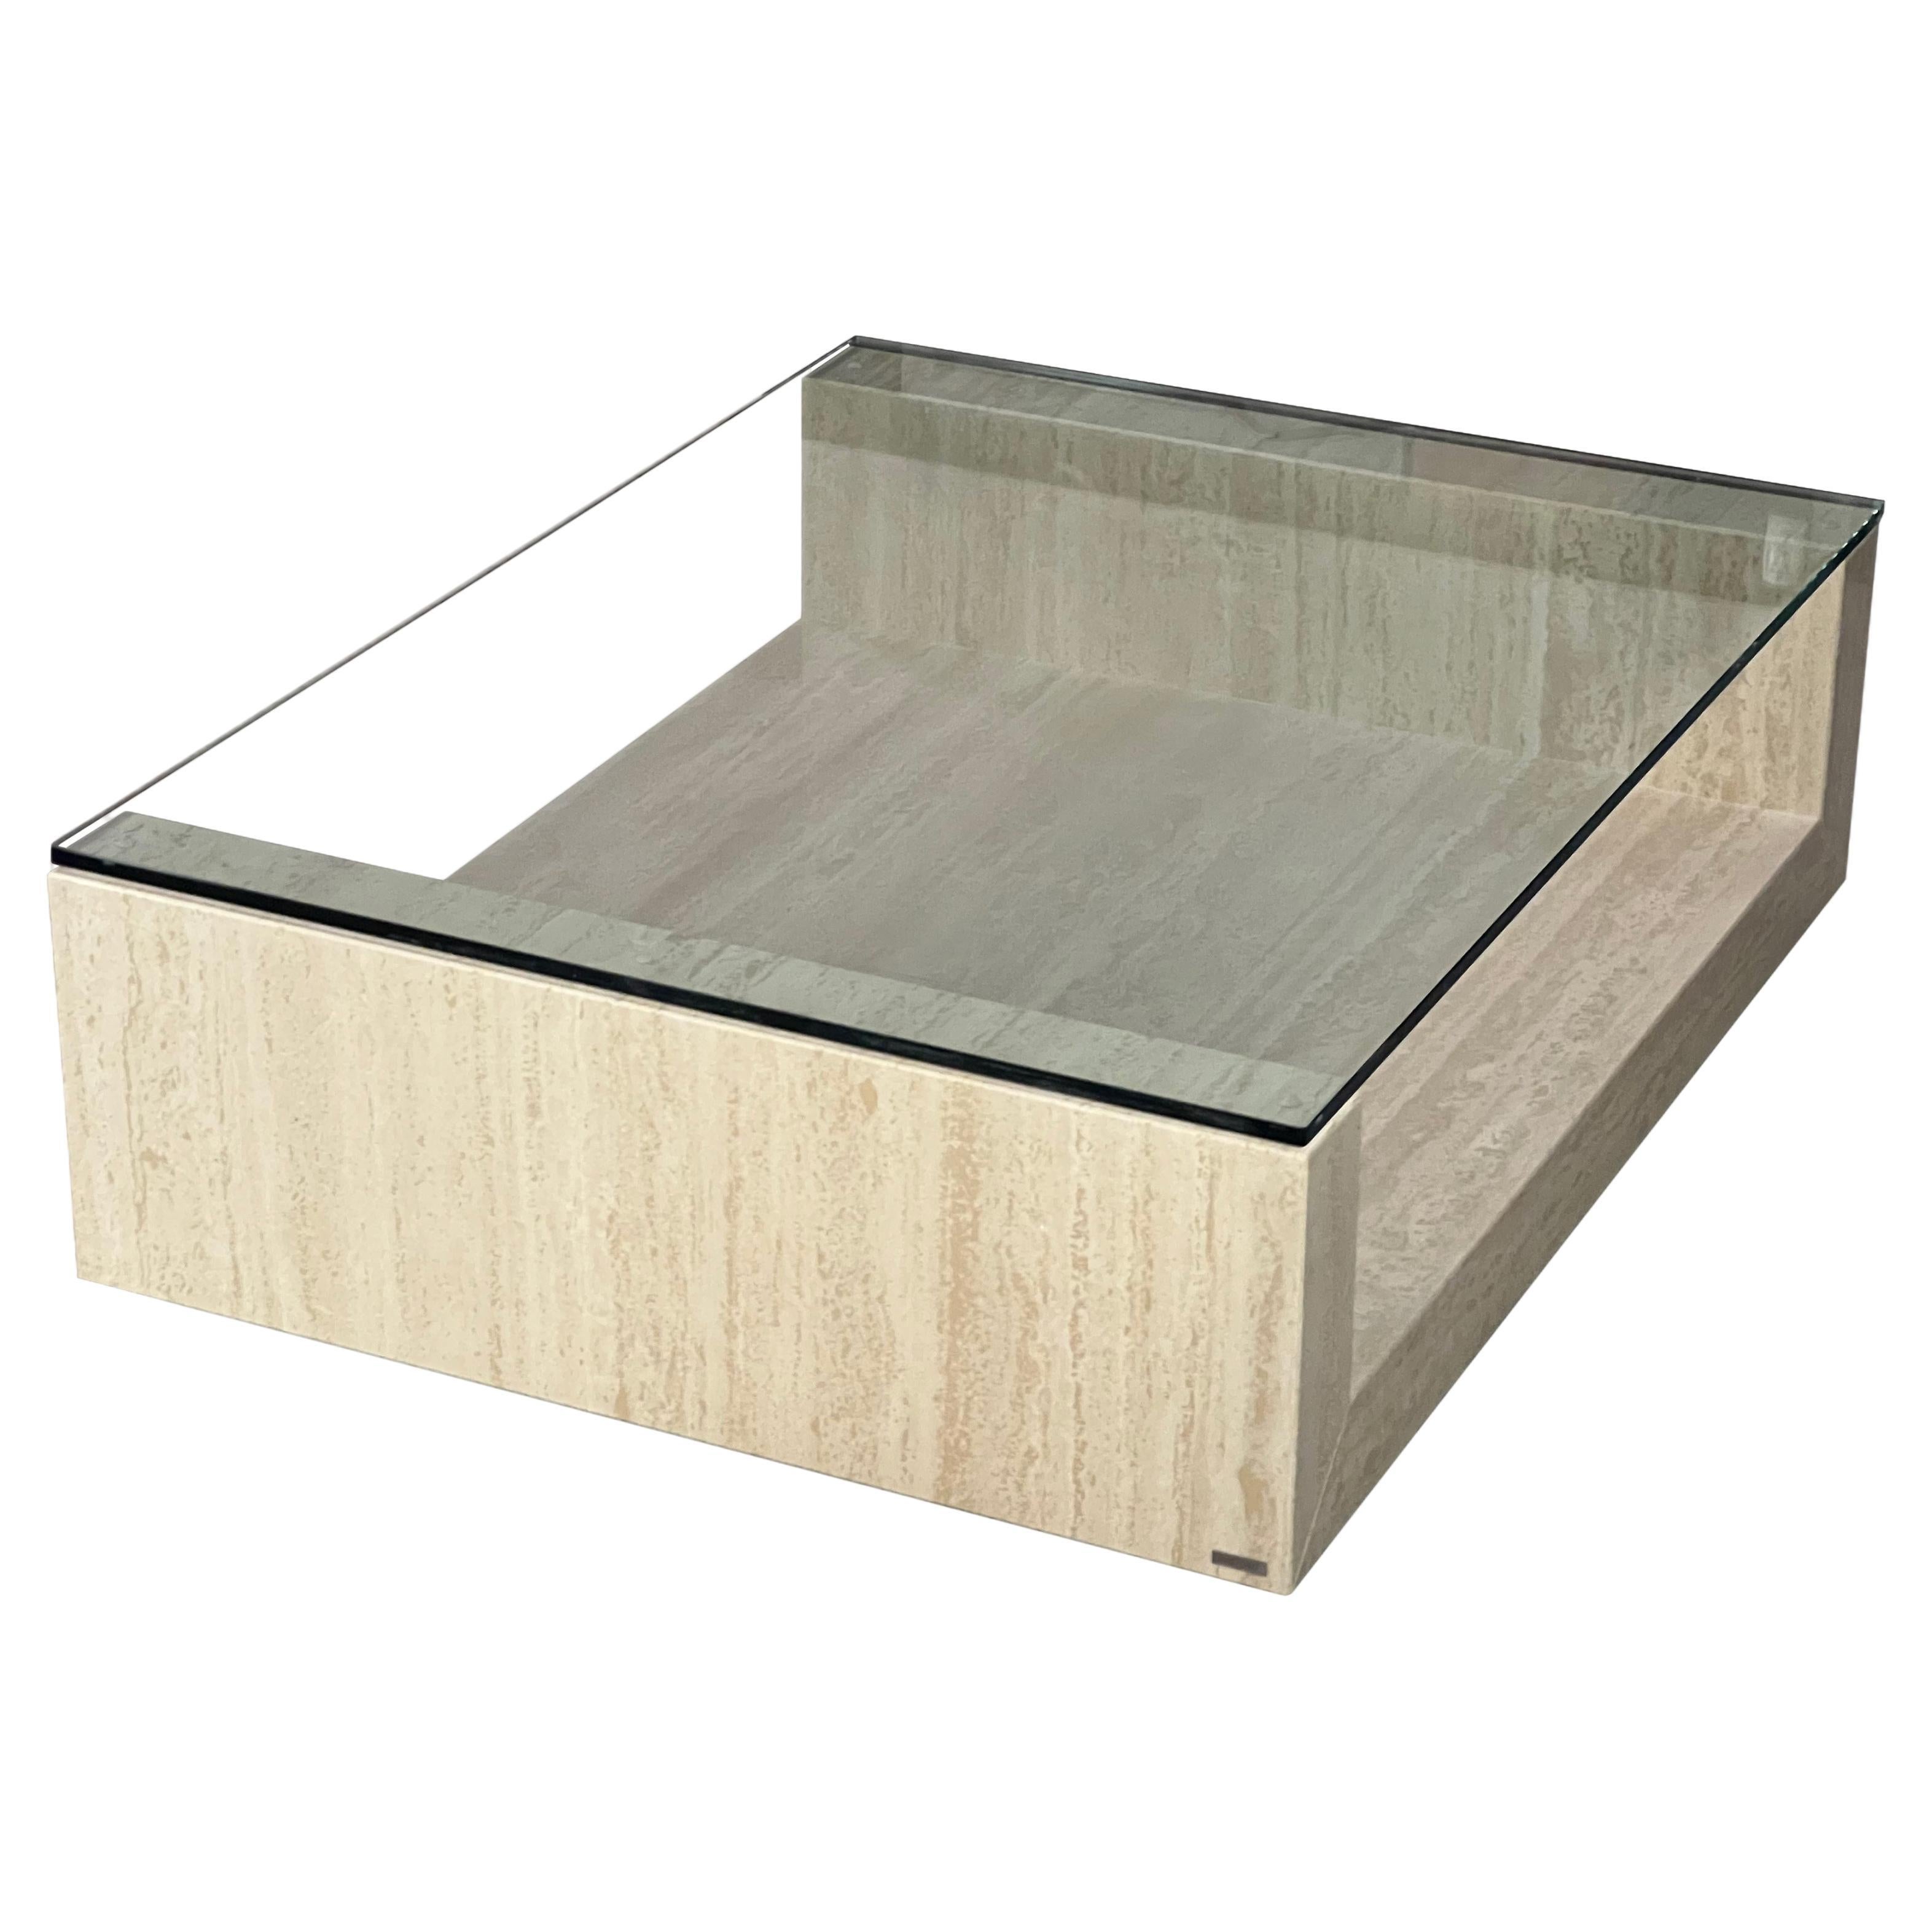 Travertine Marble AMIA Table Contemporary Design Made in Spain Meddel in Stock For Sale